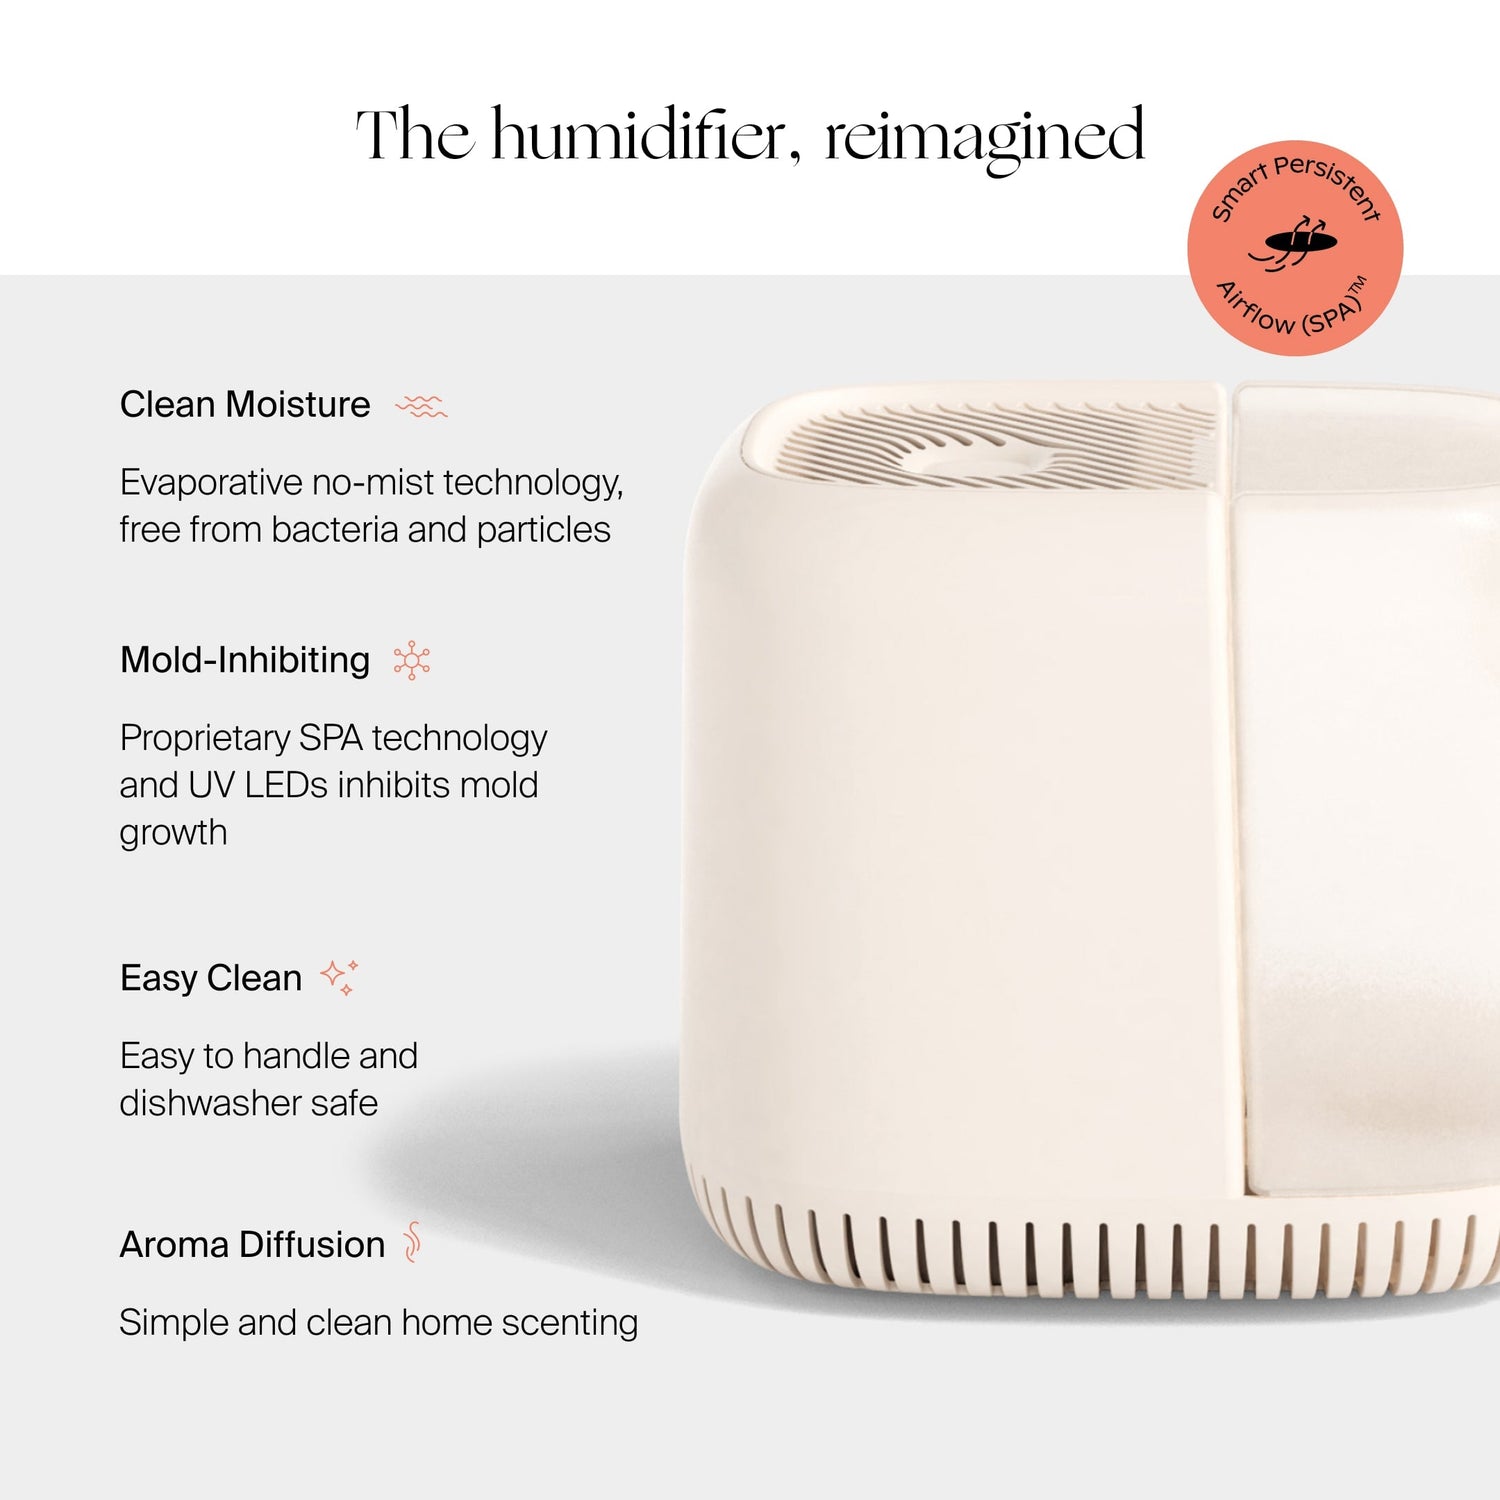 Bedside Humidifier Bundle | Lifestyle, The humidifier, reimagined